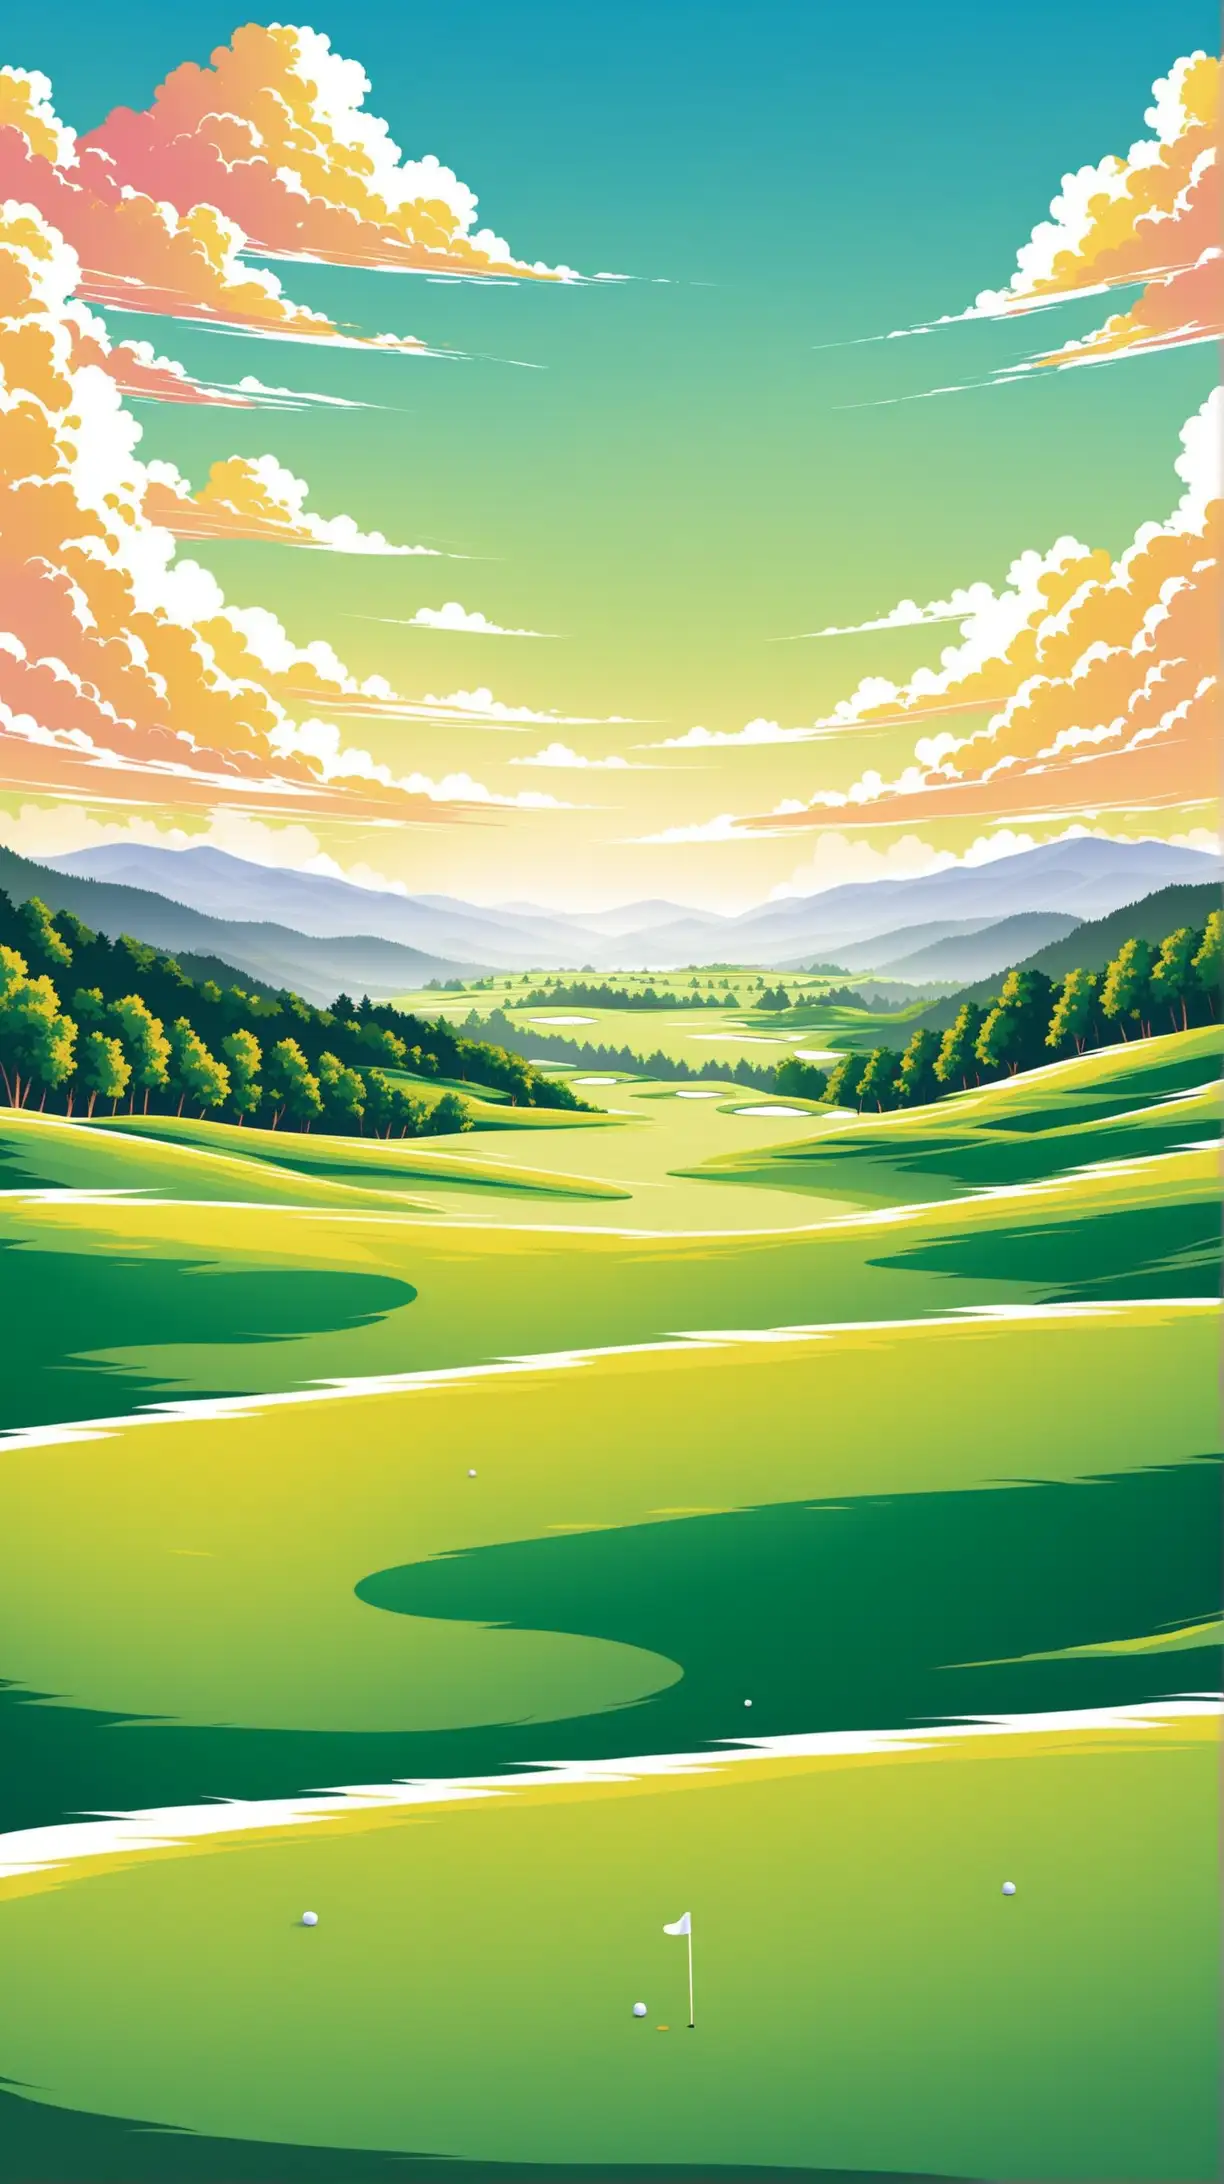 Scenic Golf Course Landscape with Rolling Hills and Clouds